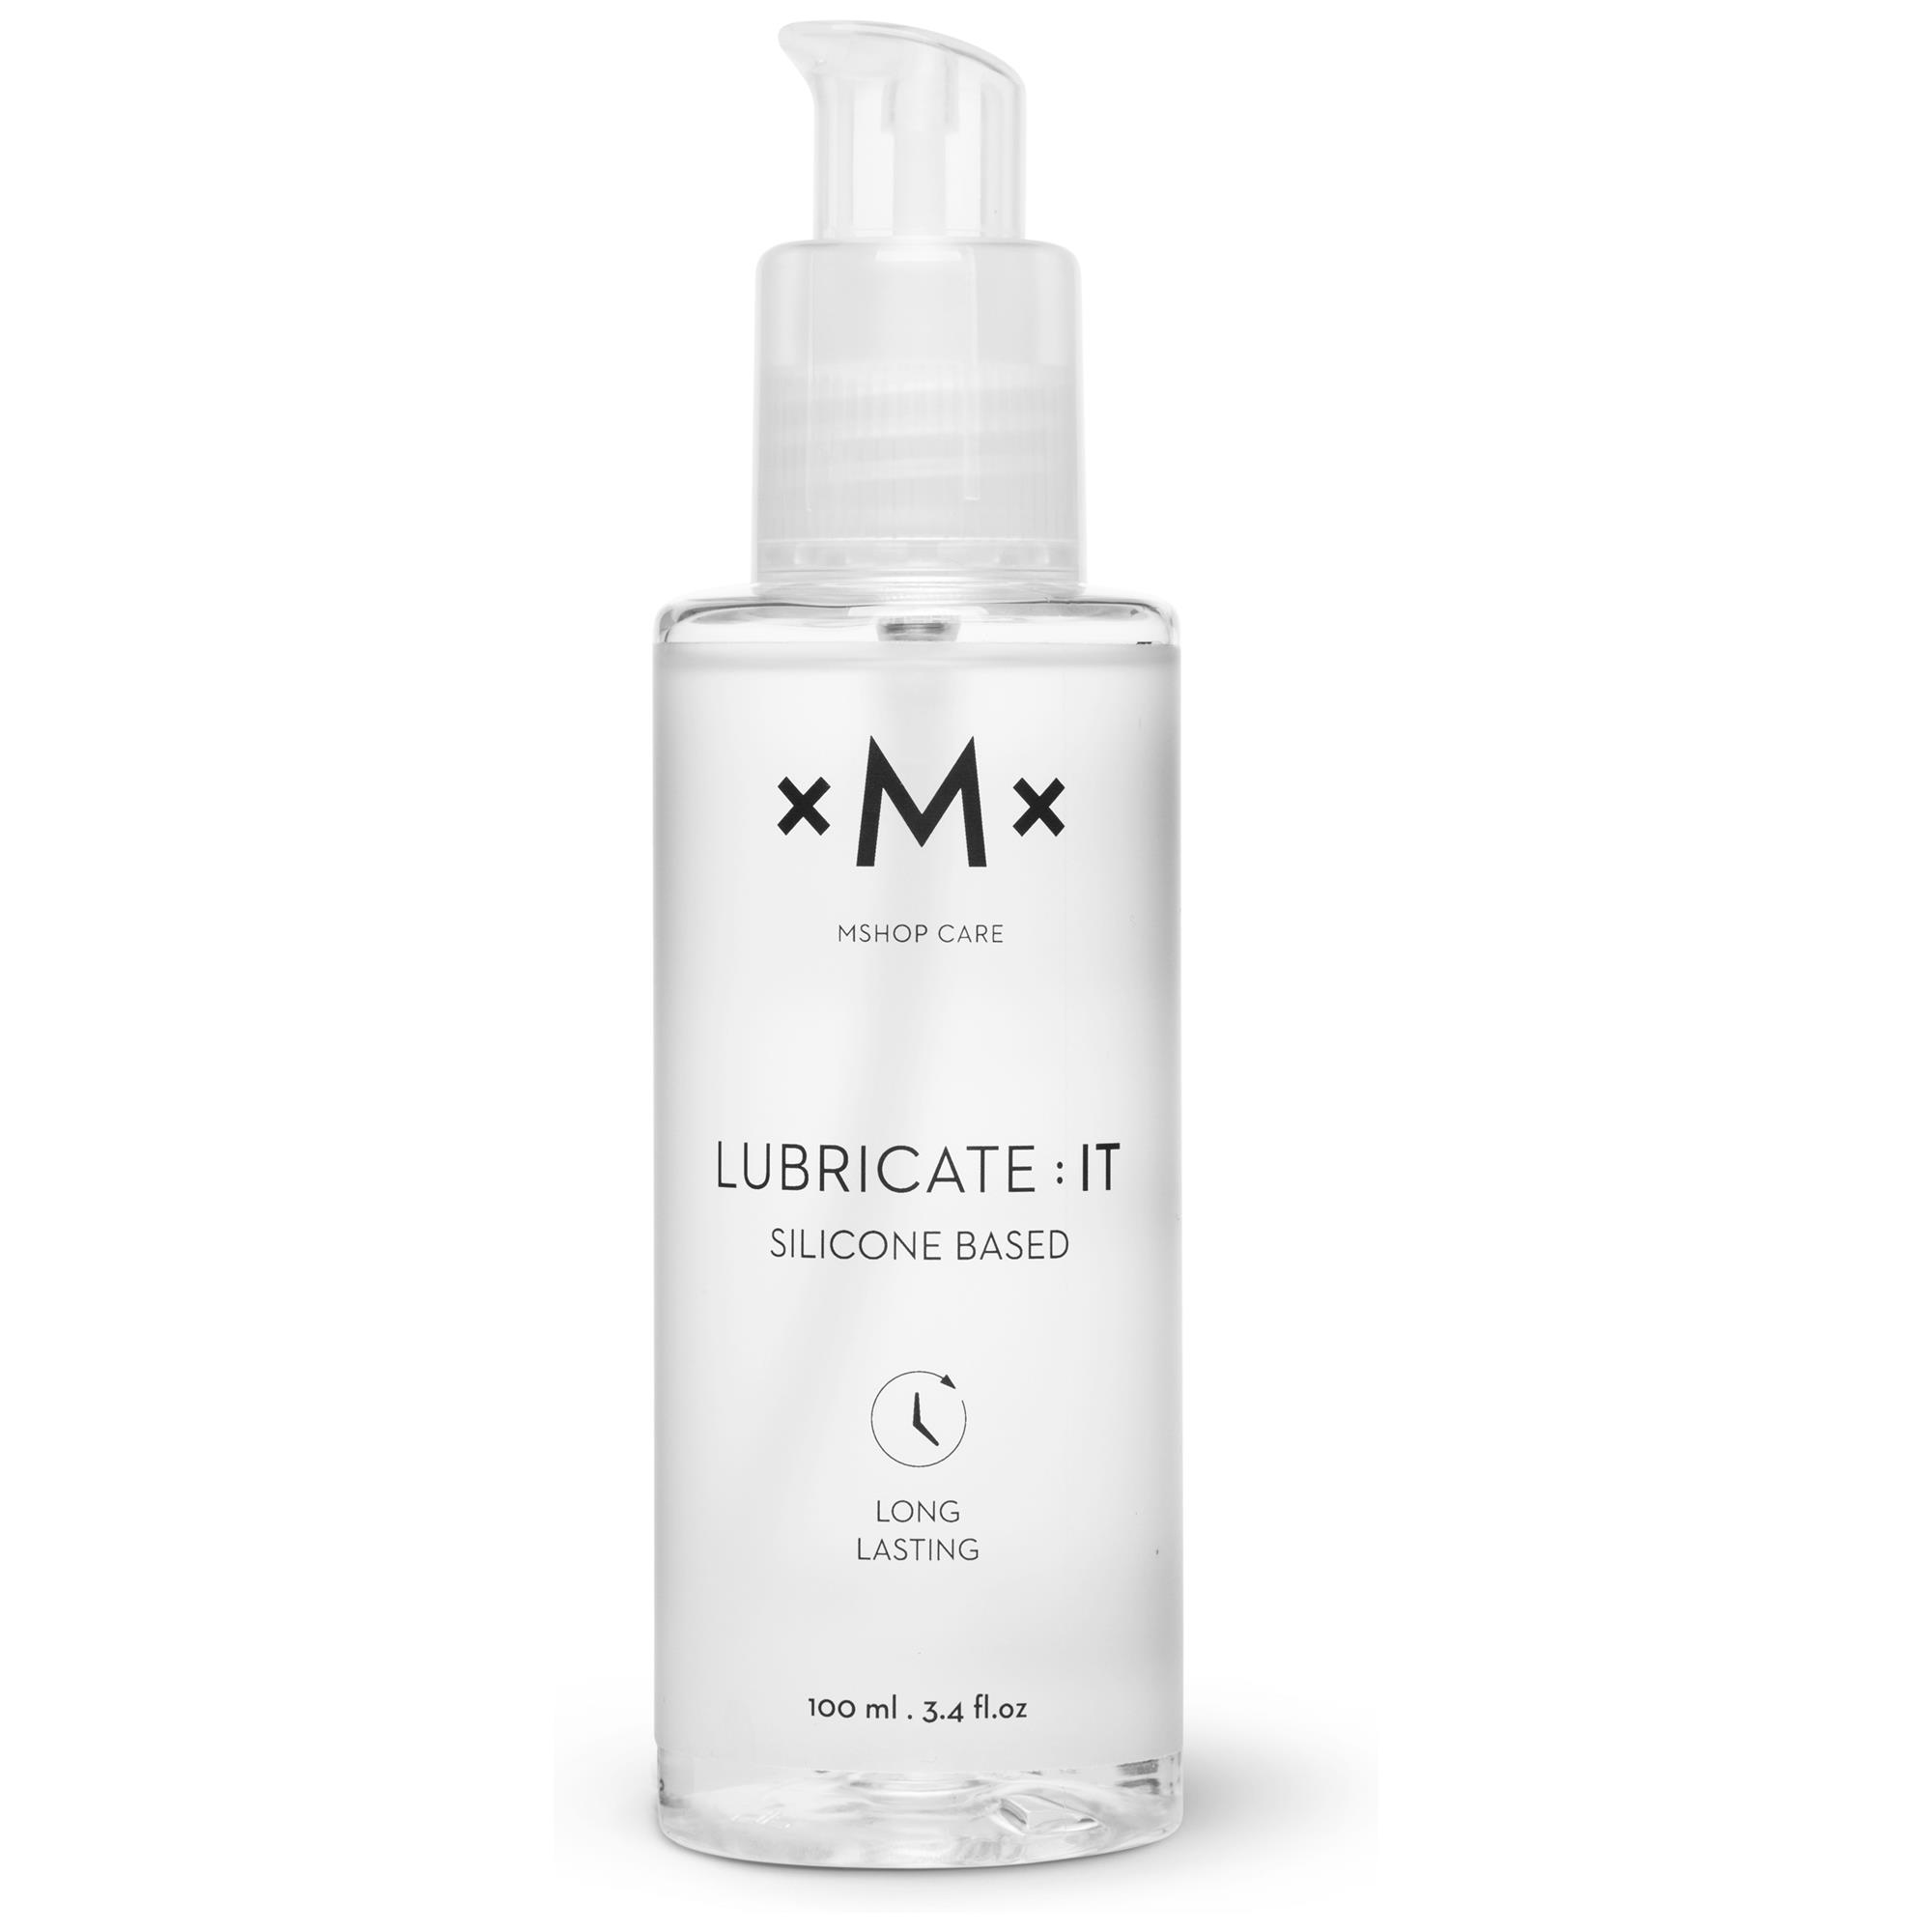 Lubricate:IT Silicone Based thumbnail